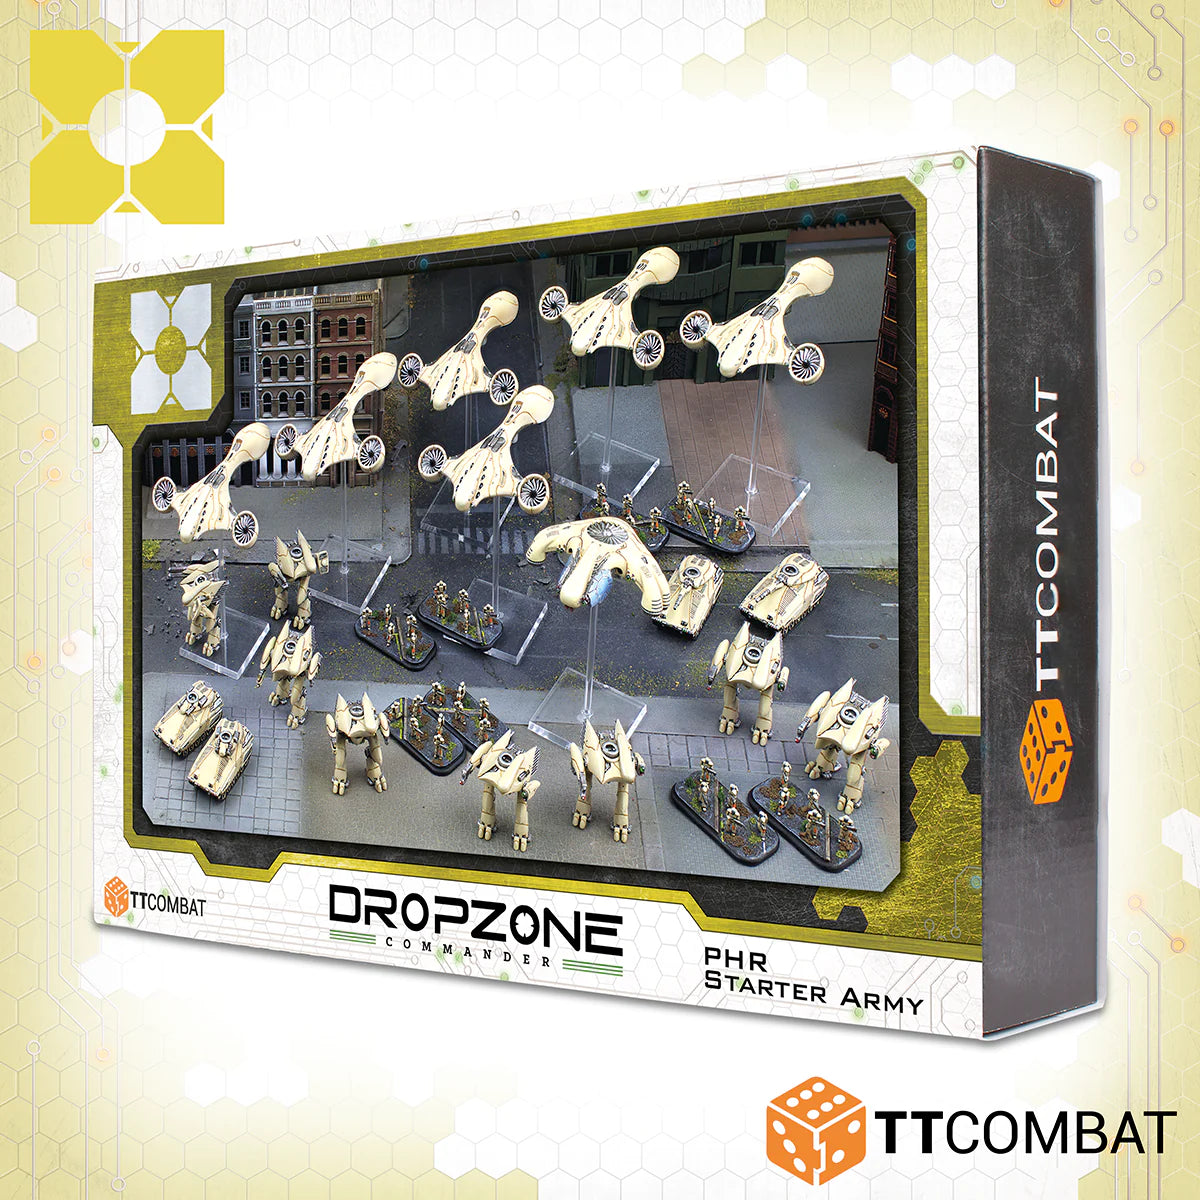 Dropzone Commander: PHR Starter Army